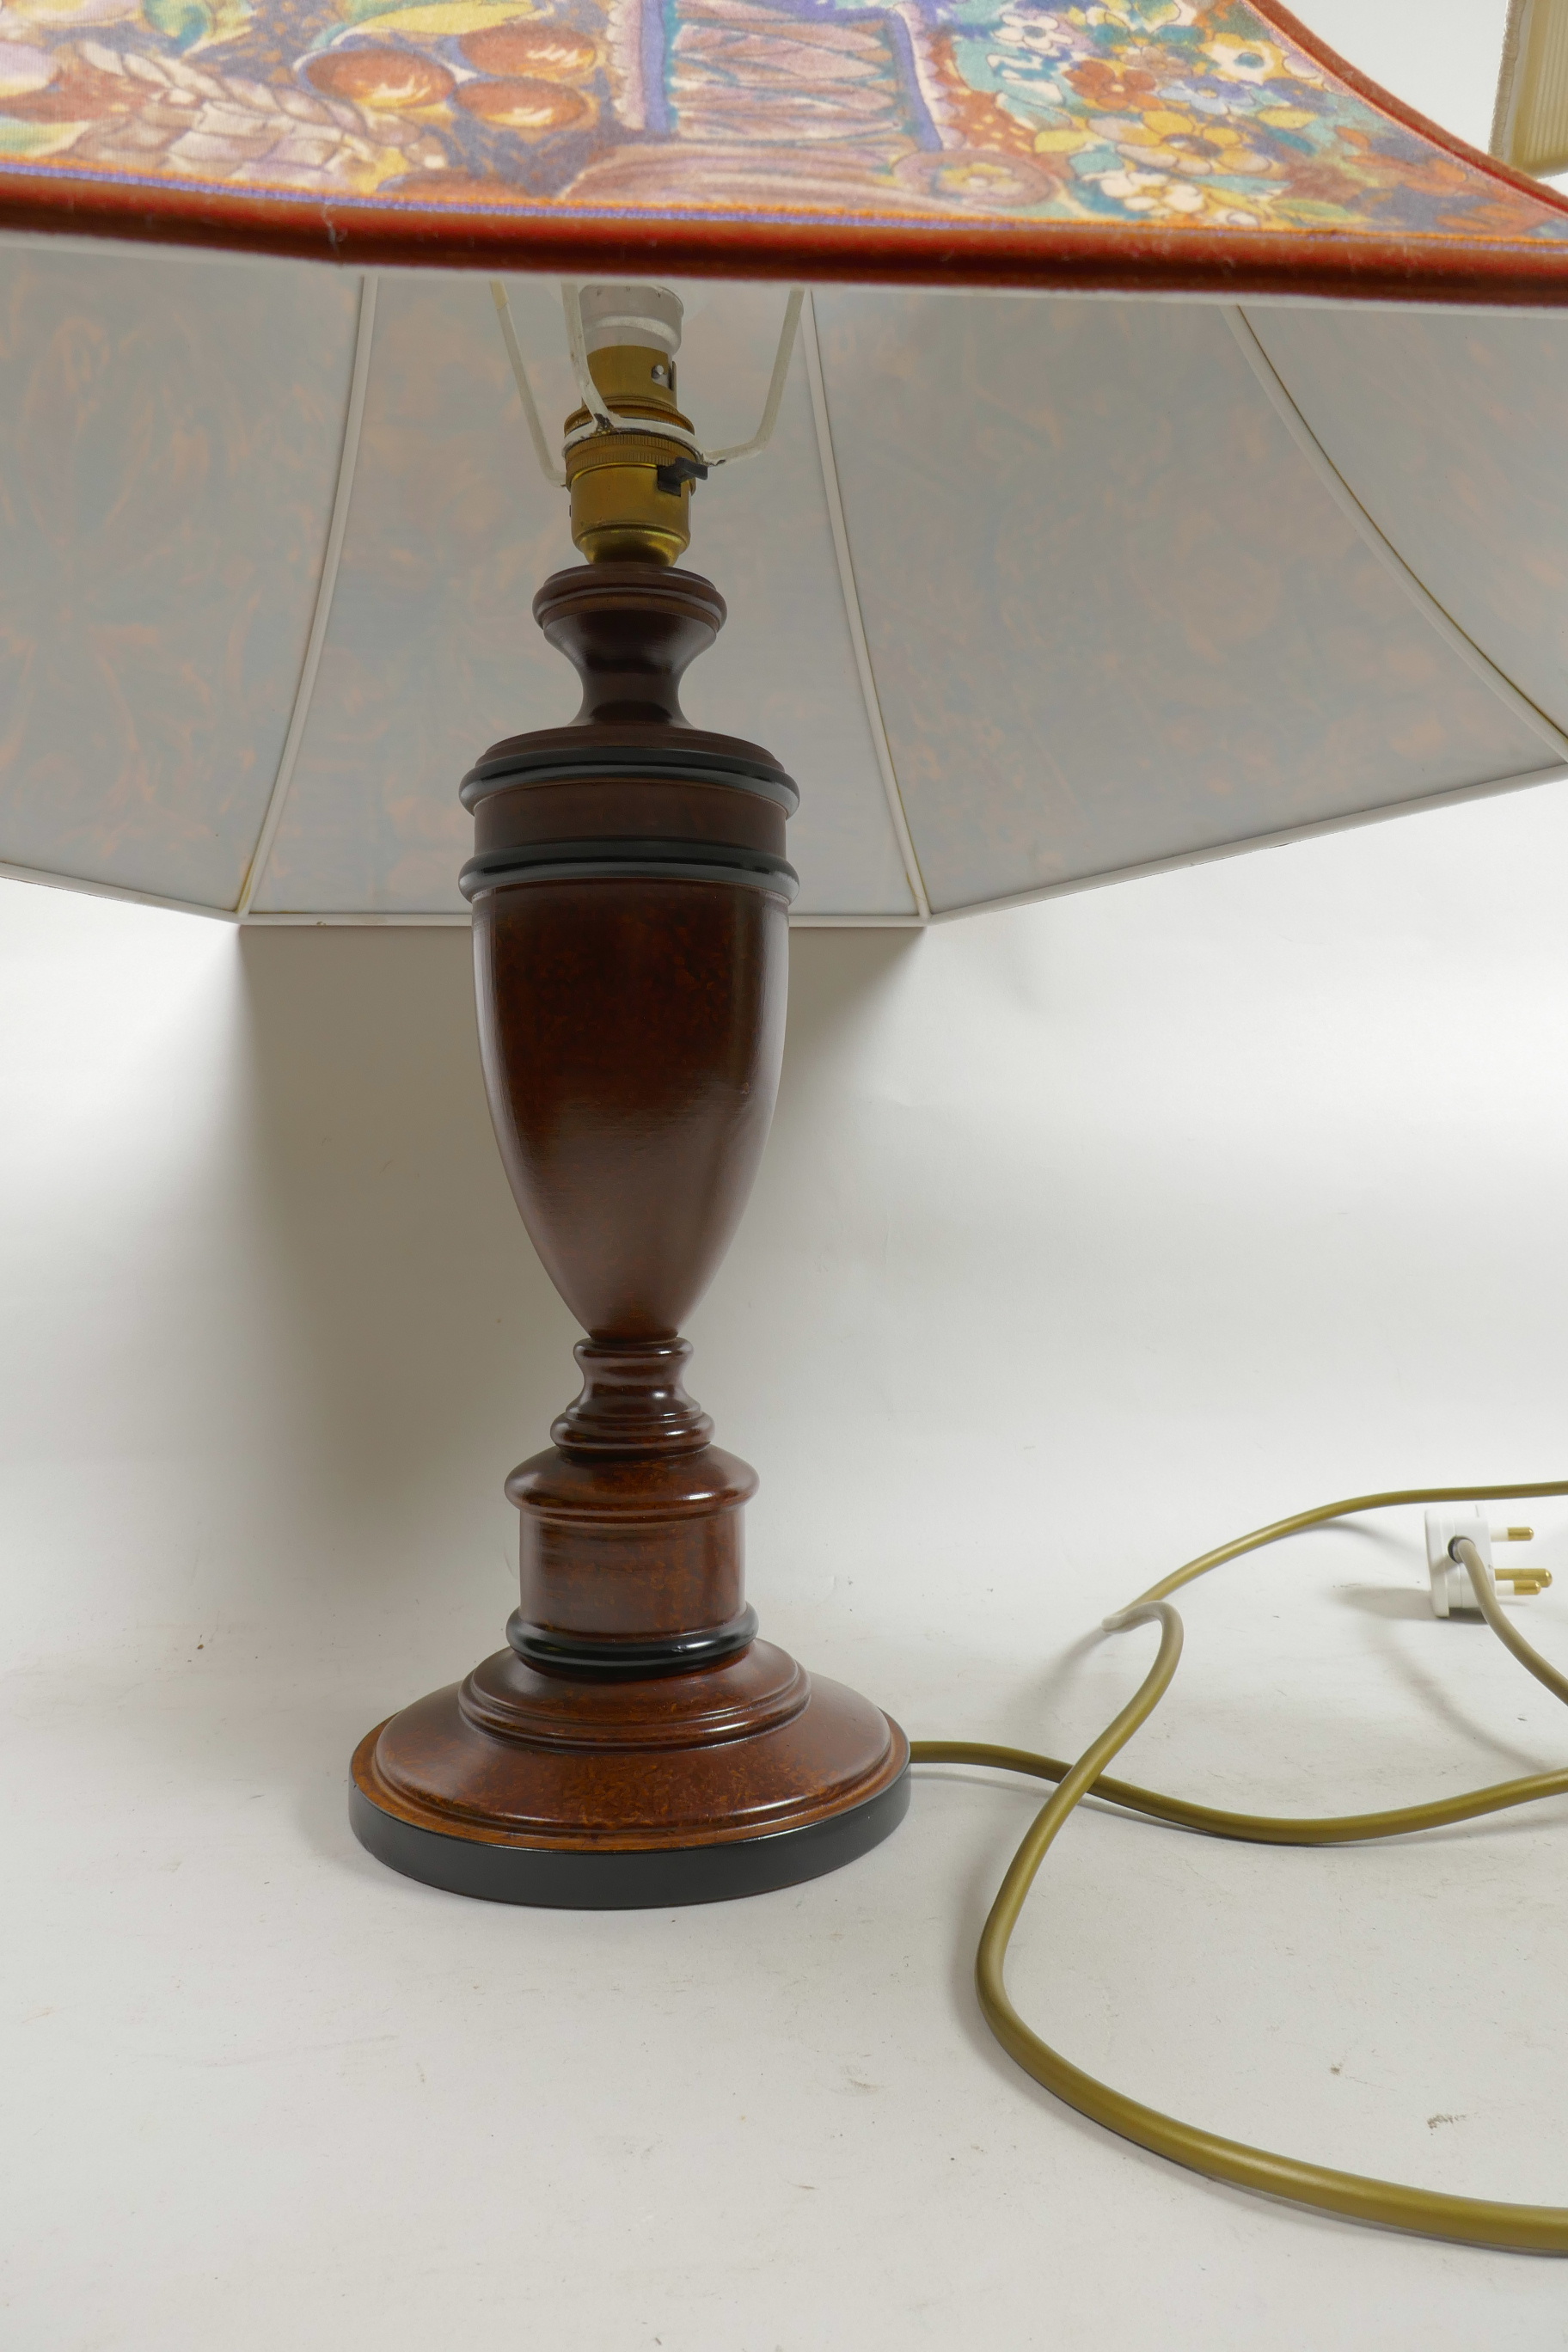 A turned wood urn shaped table lamp supplied by John Lewis, 20" high, with floral shade, together - Image 2 of 3